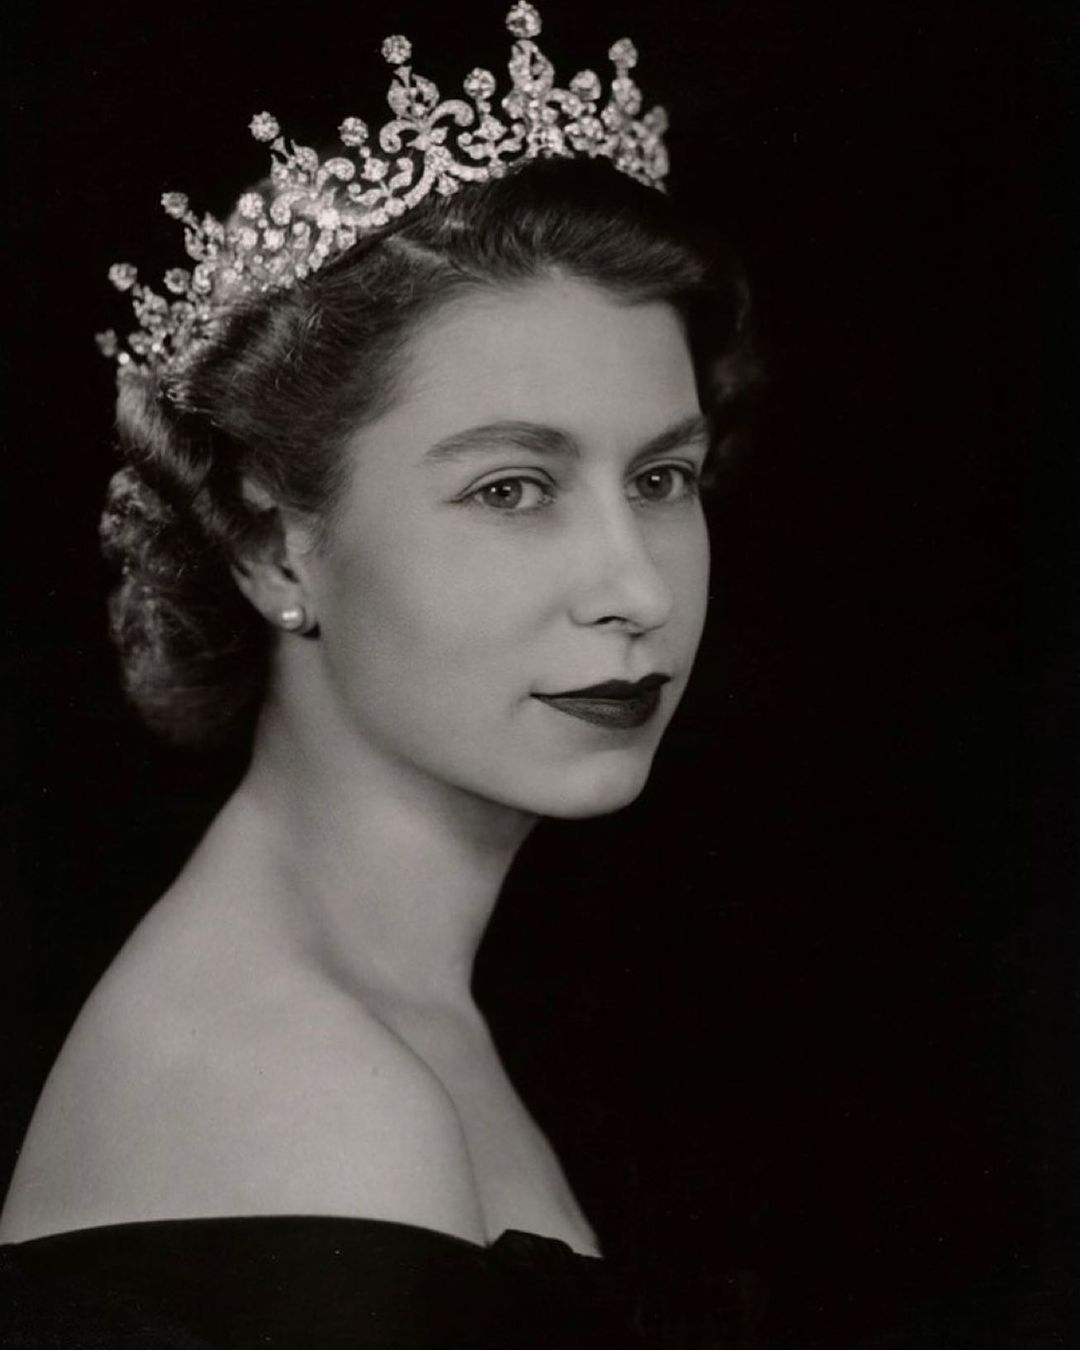 Her Majesty Queen Elizabeth II, thank you for your life of service and grace. Rest in Peace.